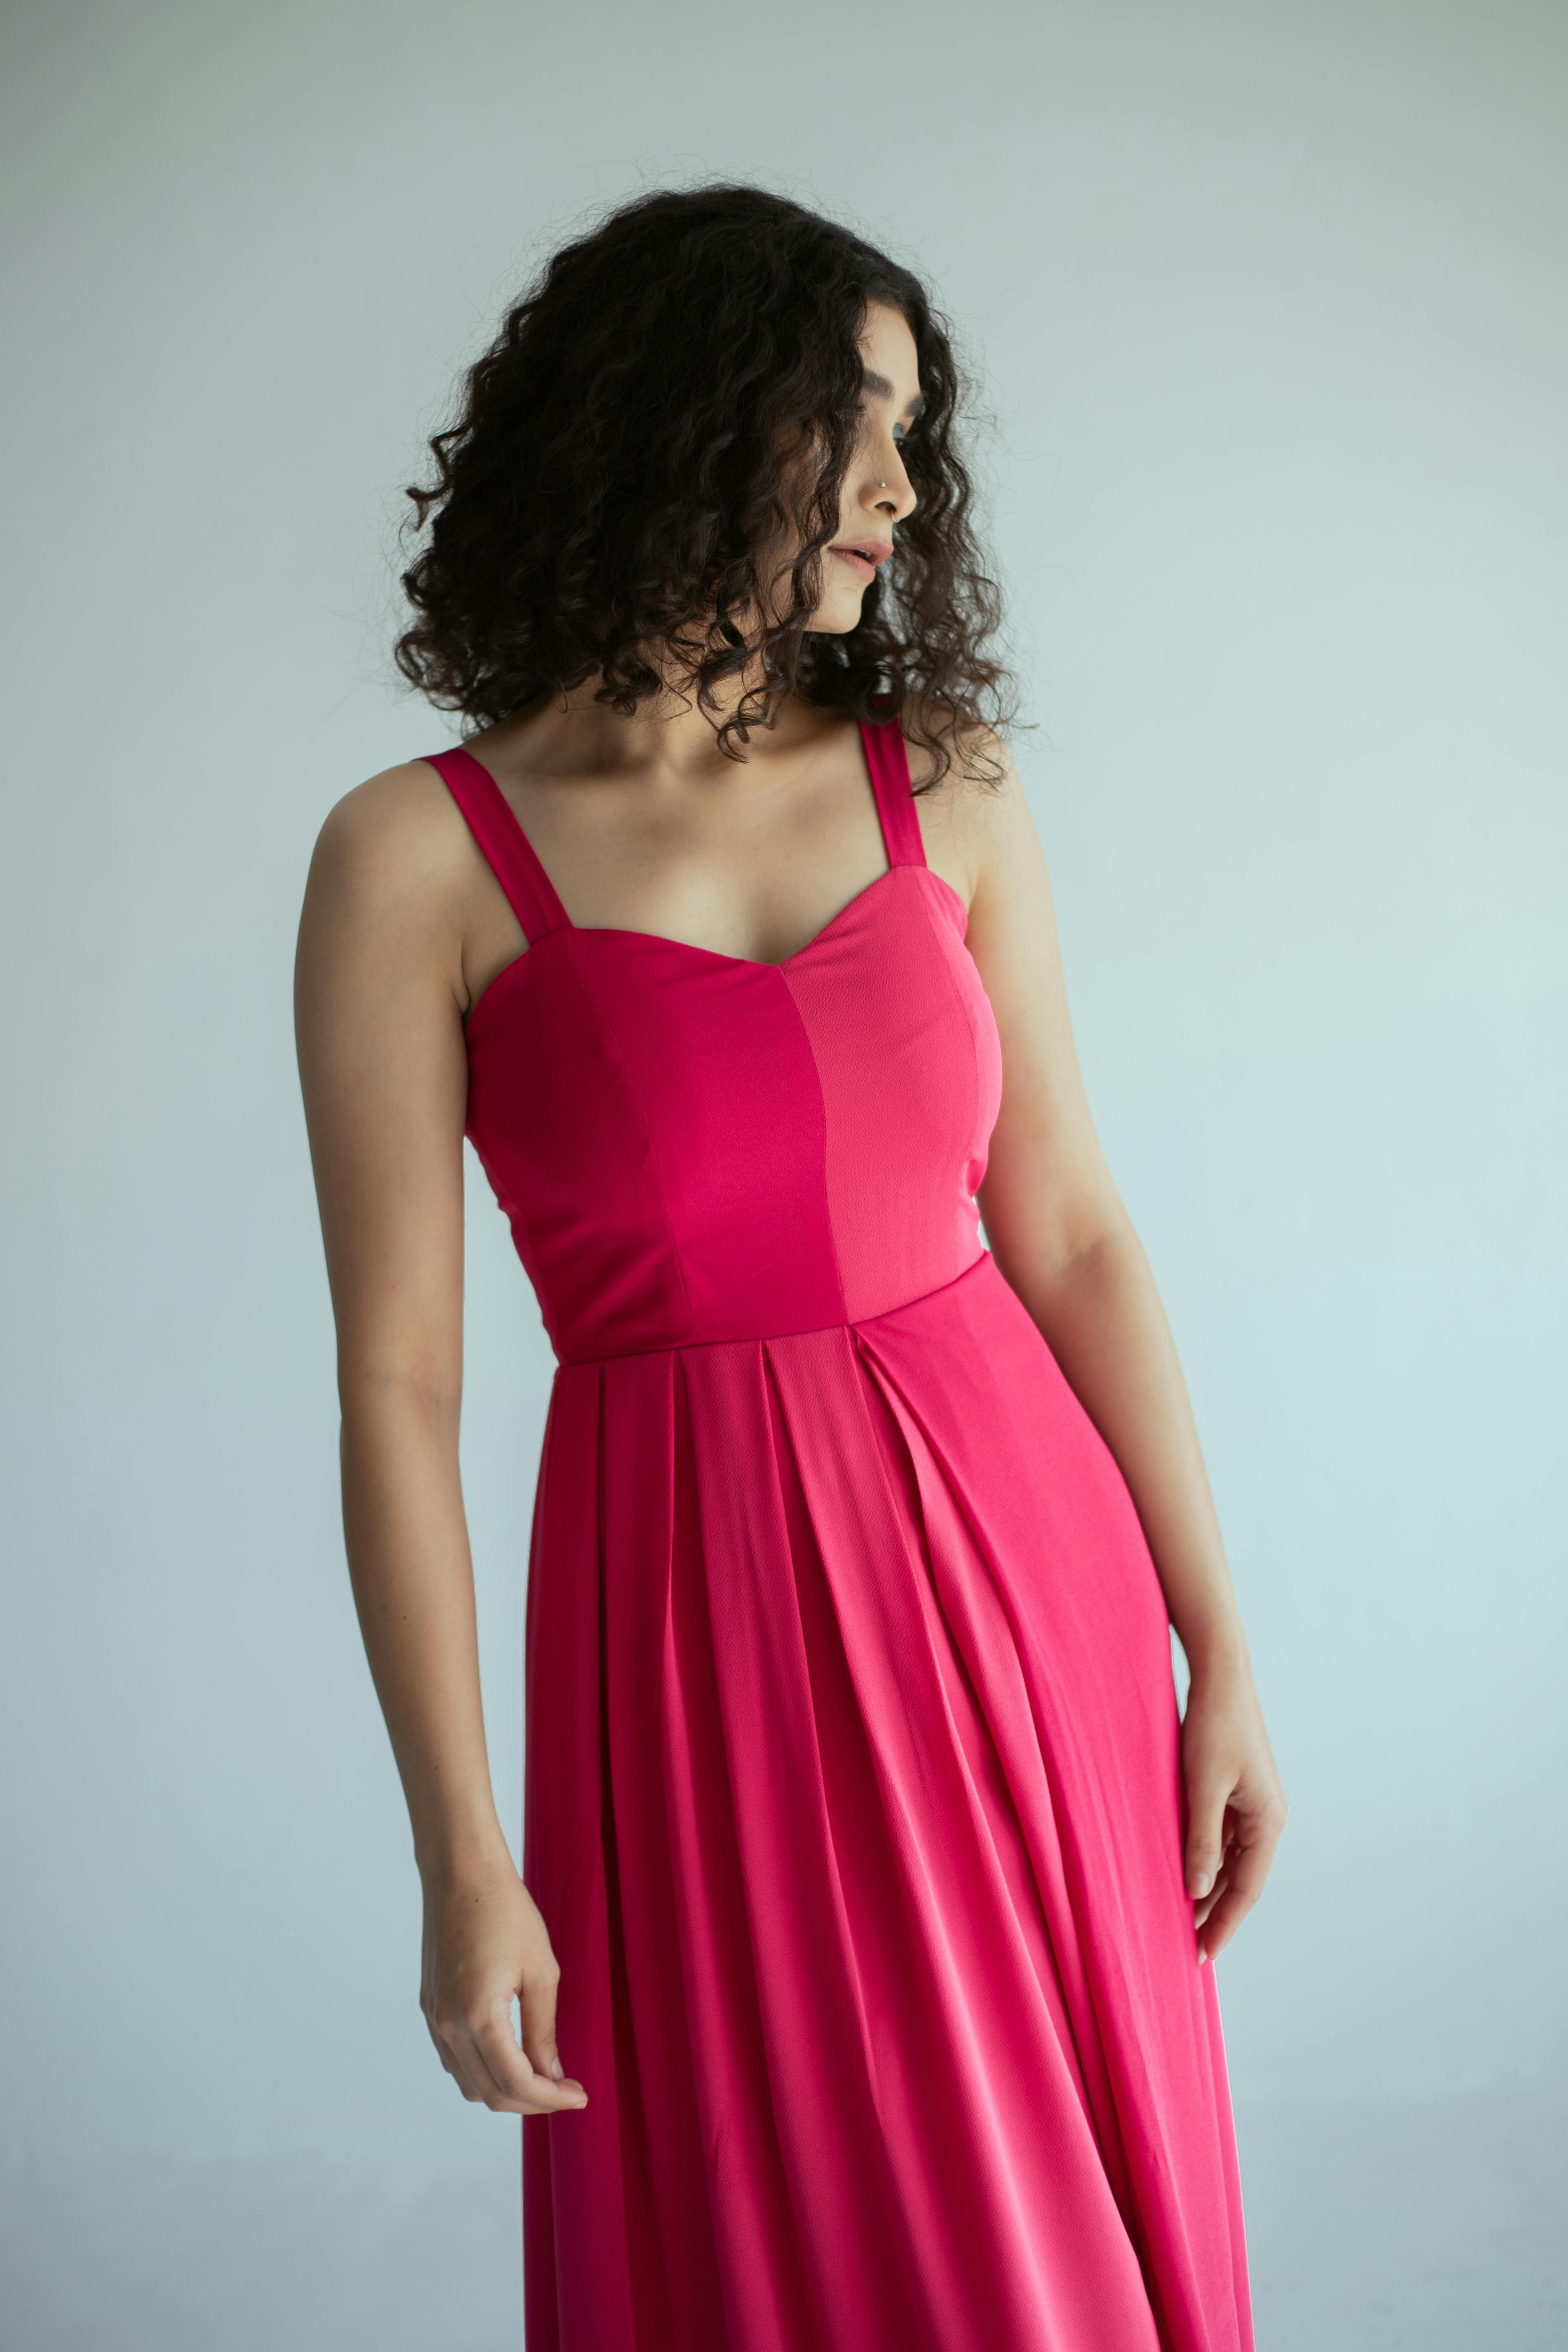 Thumbnail preview #1 for Dual Toned Pink Maxi Dress 